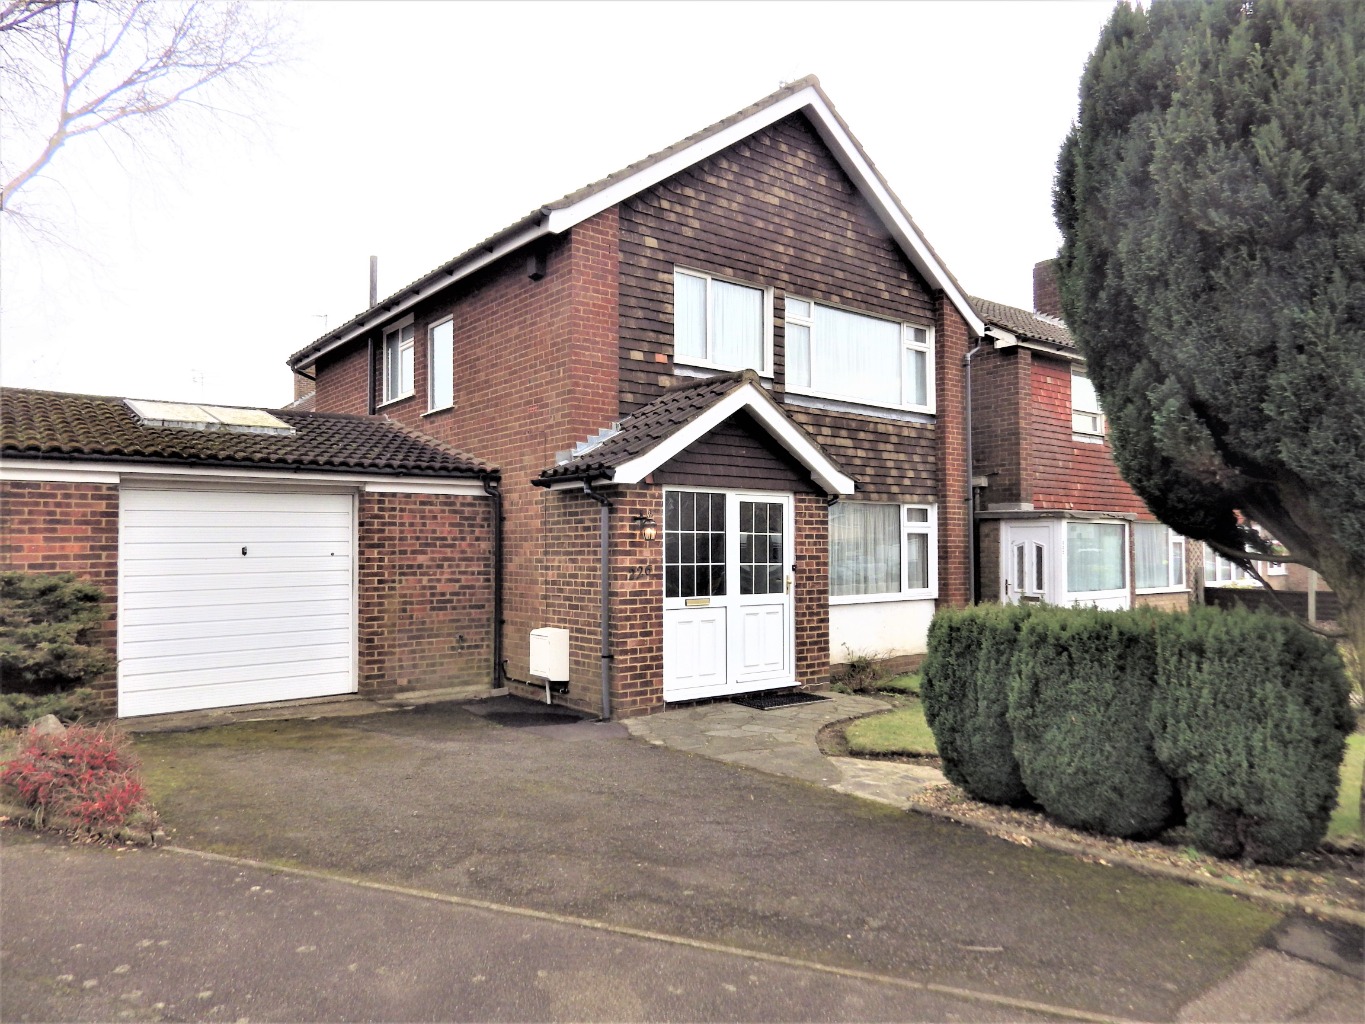 4 bed detached house for sale in Birchen Grove, Luton, LU2 